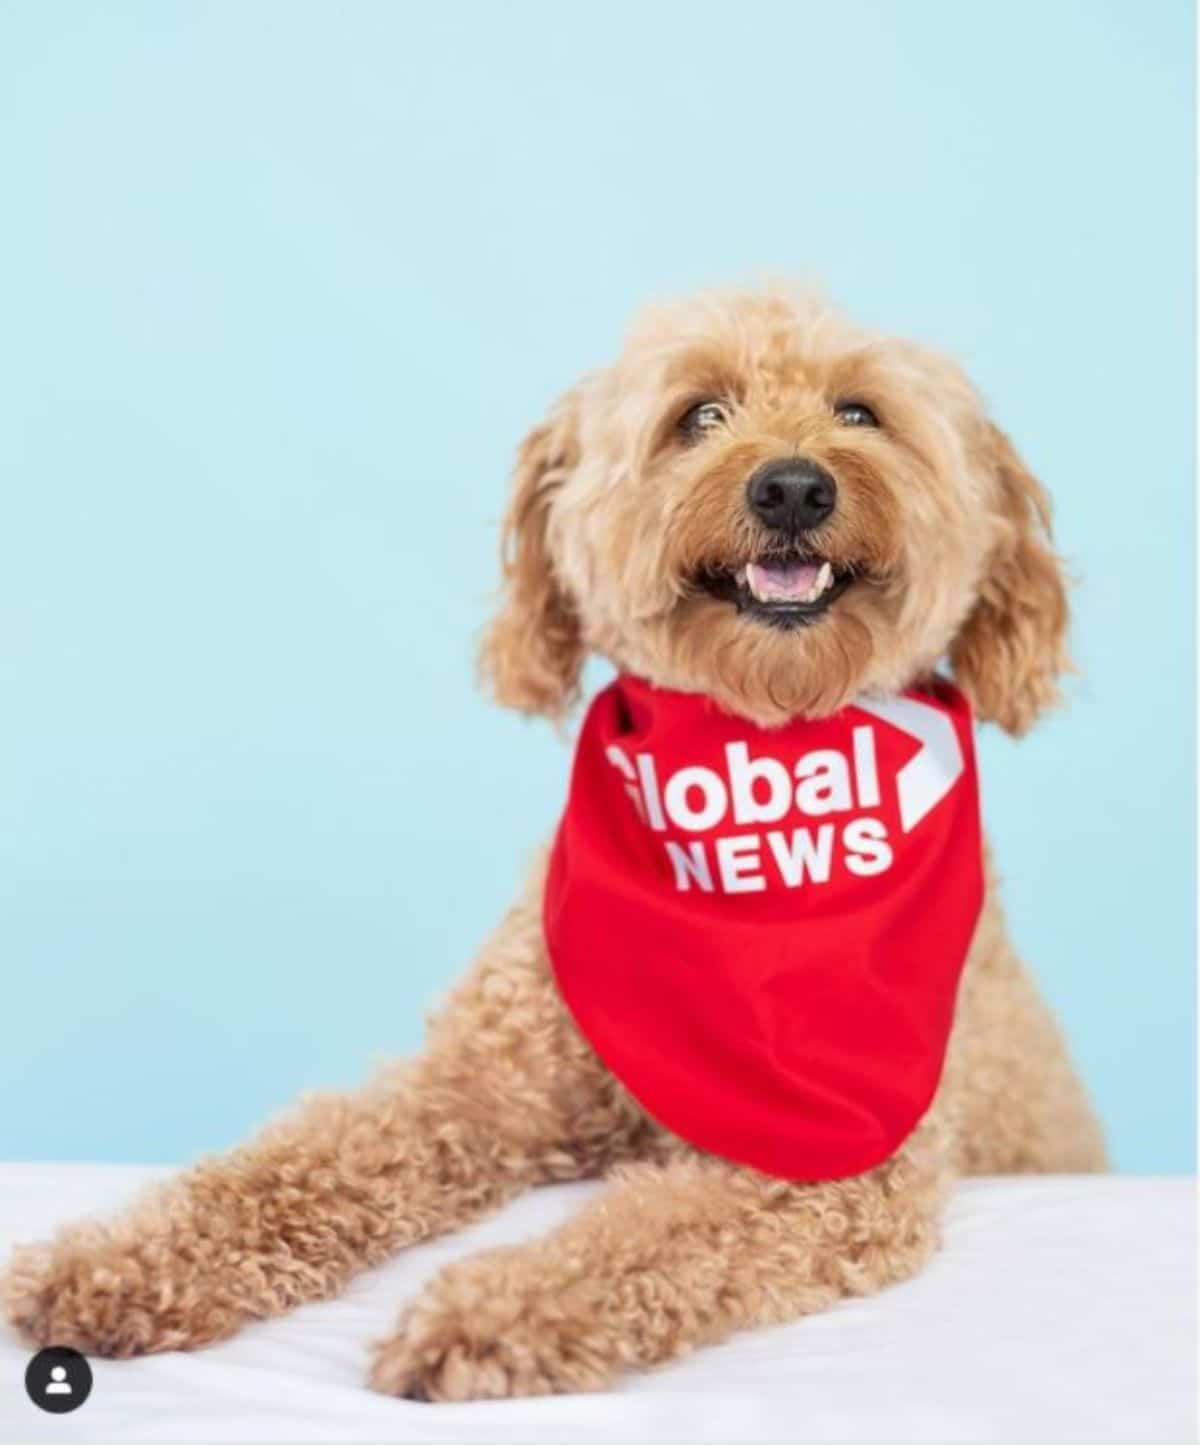 brown golden doodle with a red bandana that says global news